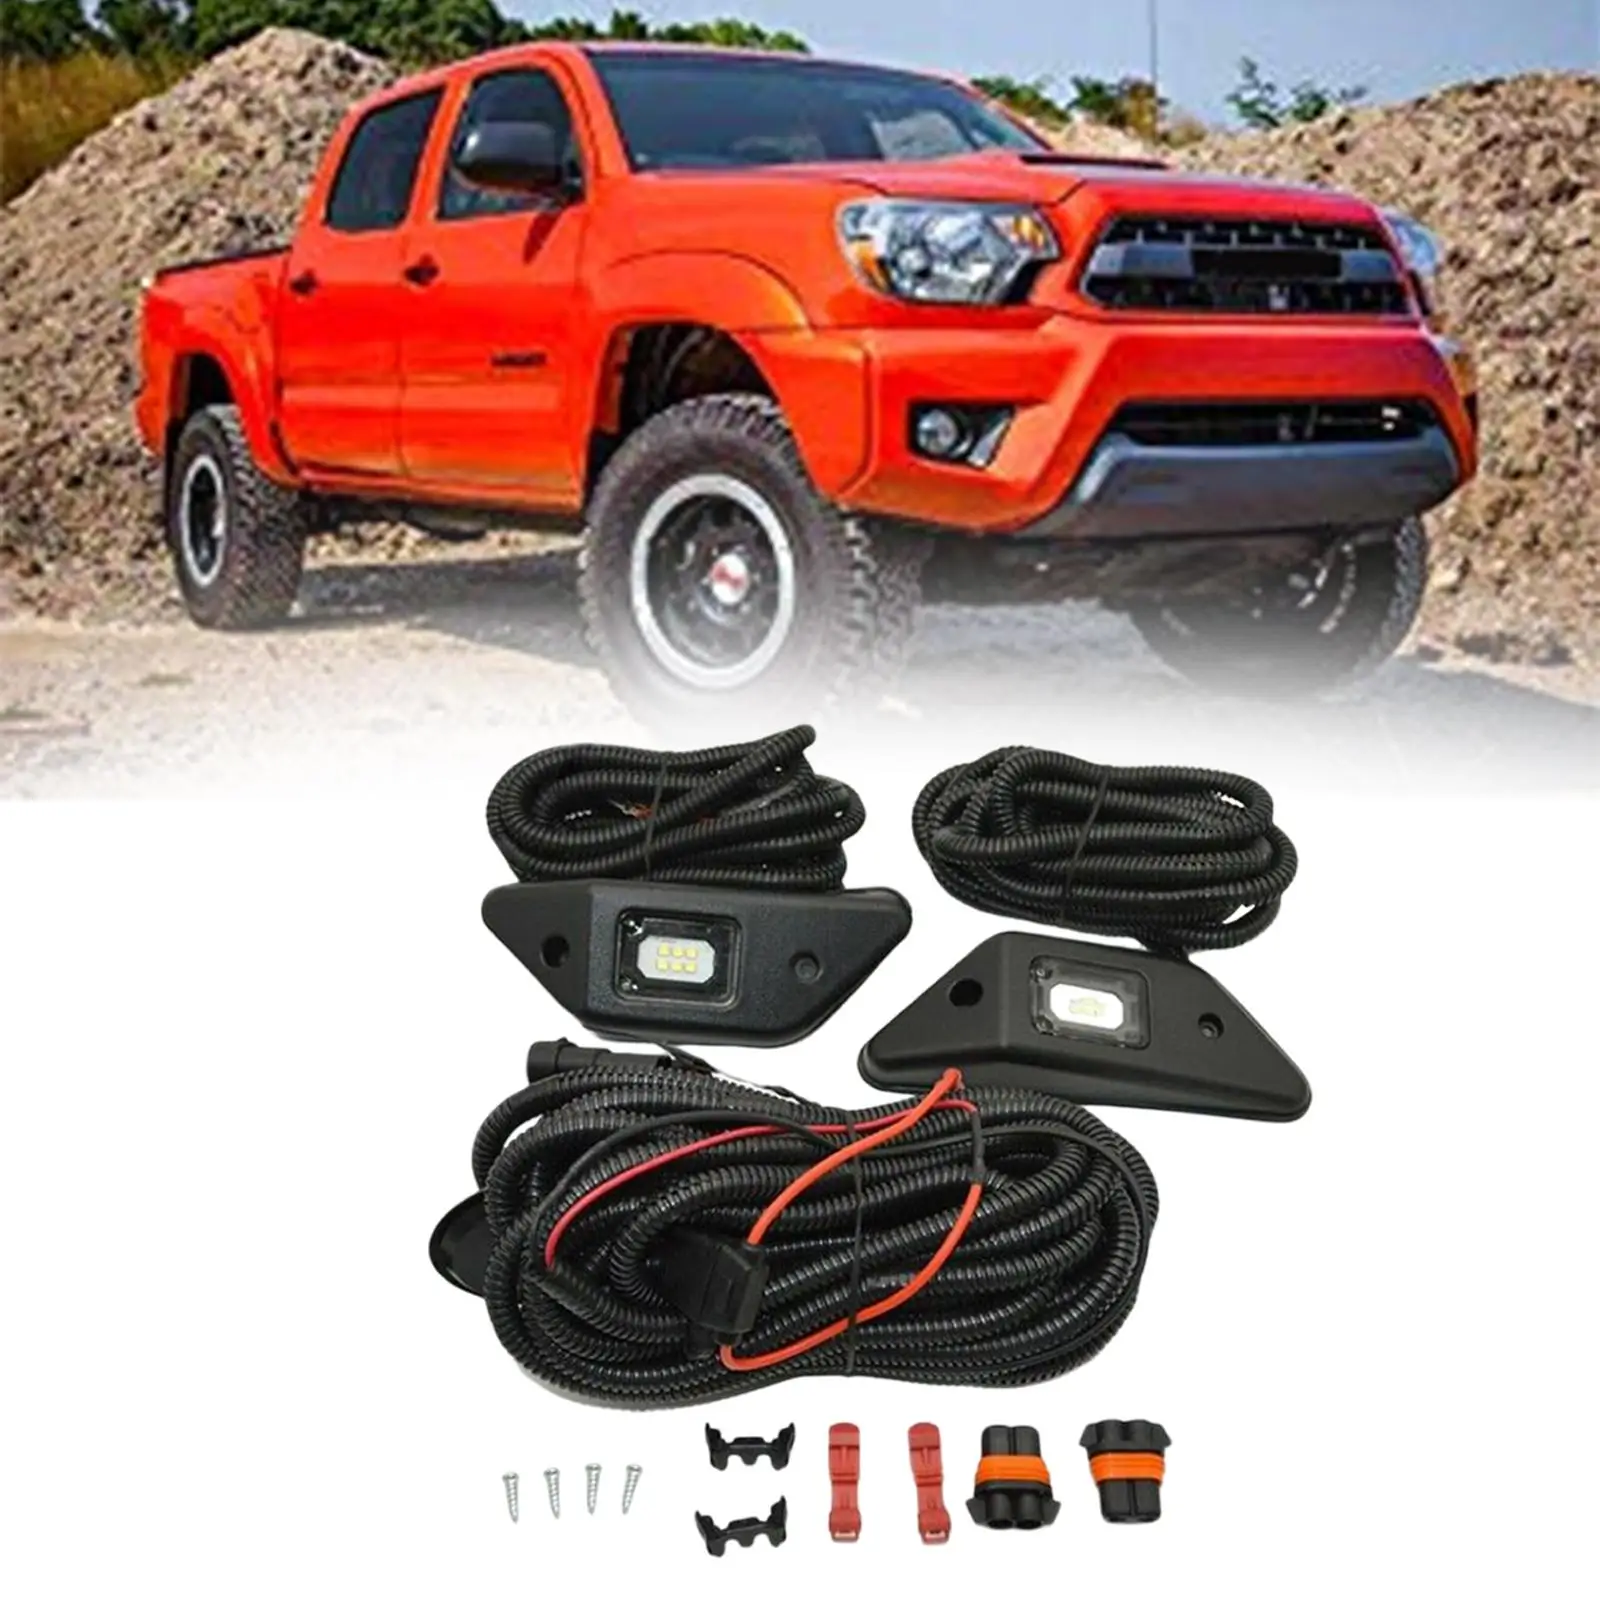 

Auto LED Cargo Bed Lighting Kit, Replacement 00016-34187 0001634187 Wiring Harness Kit Fits for Toyota for tacoma 2015-2018